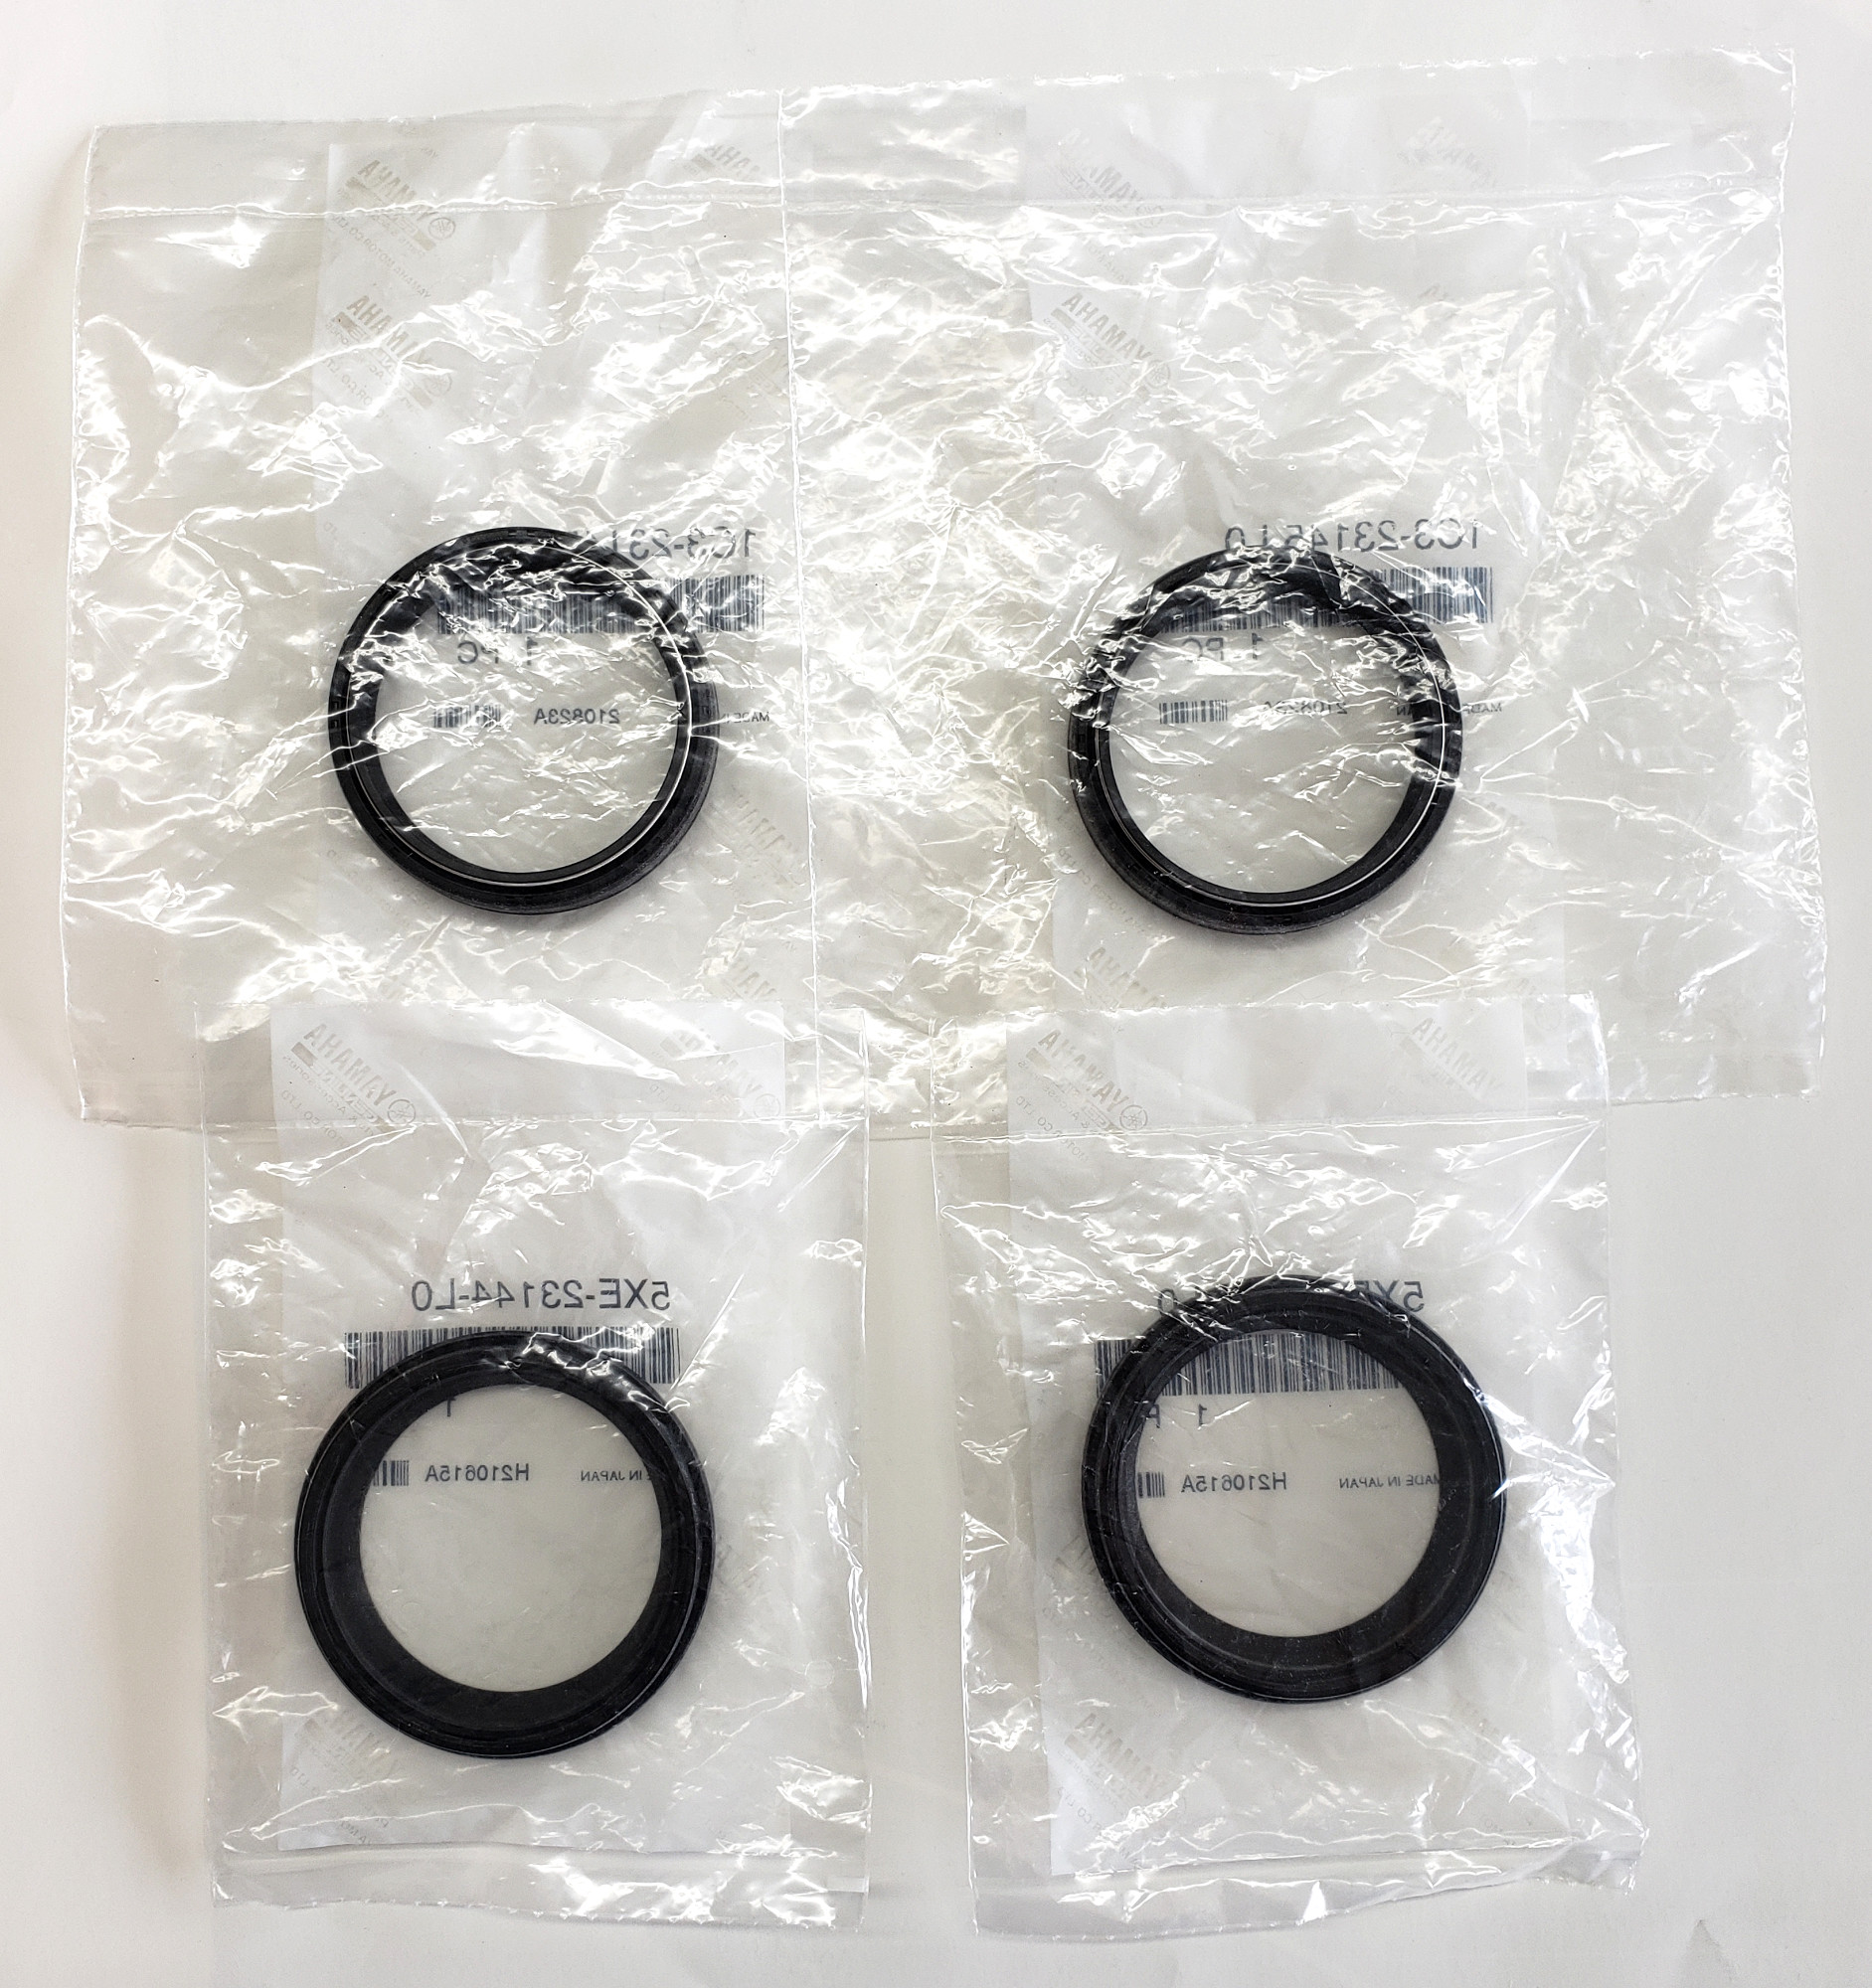 Fork Oil/Dust Seal Kit - For 04-14 Yamaha WR/YZ - Click Image to Close